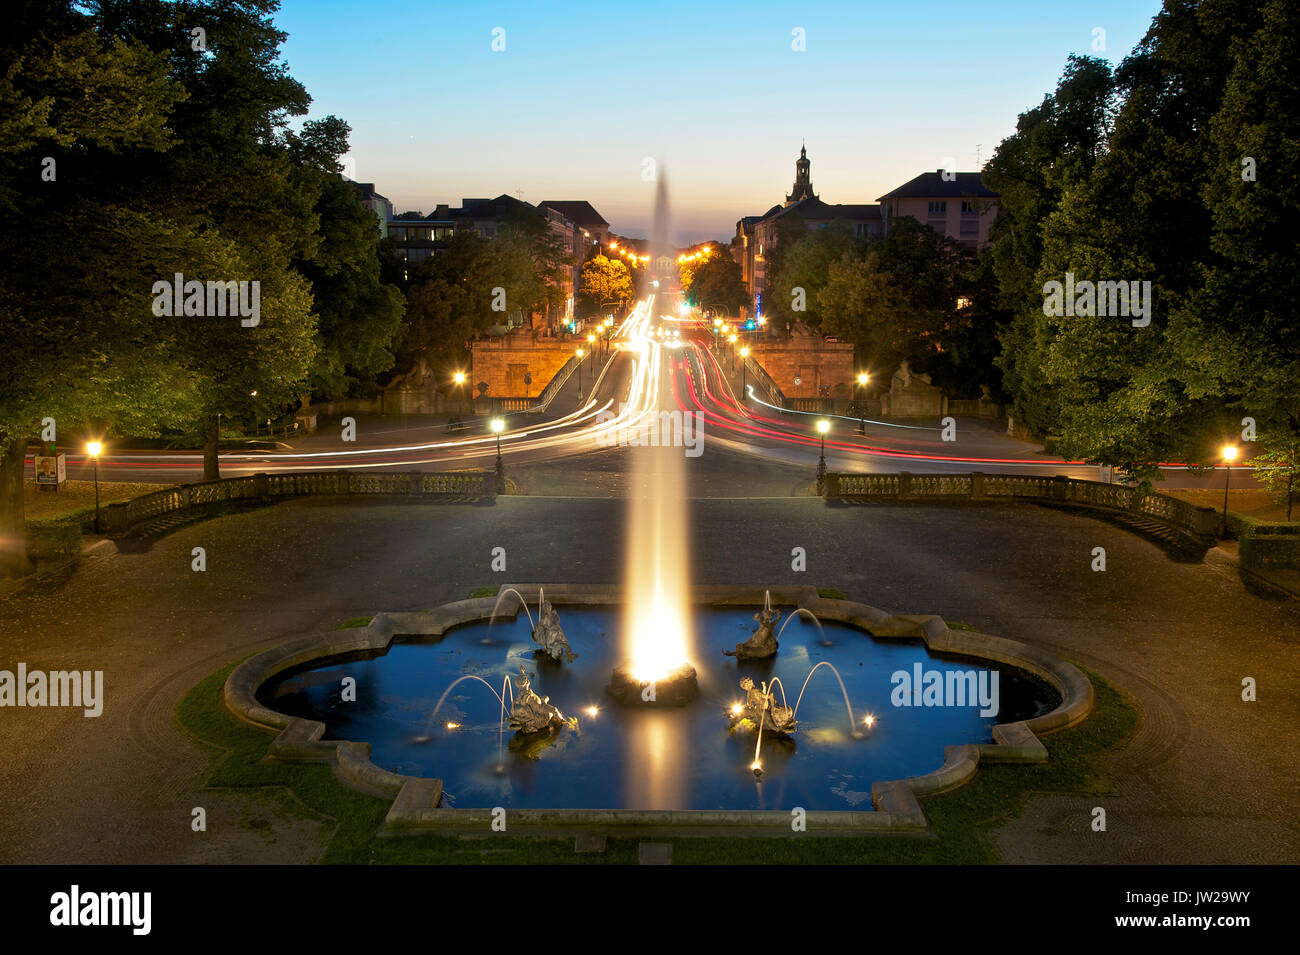 Prinzregent-Luitpold Terrace with fountain, view of Prinzregentenstraße with light trails, time exposure of driving cars Stock Photo